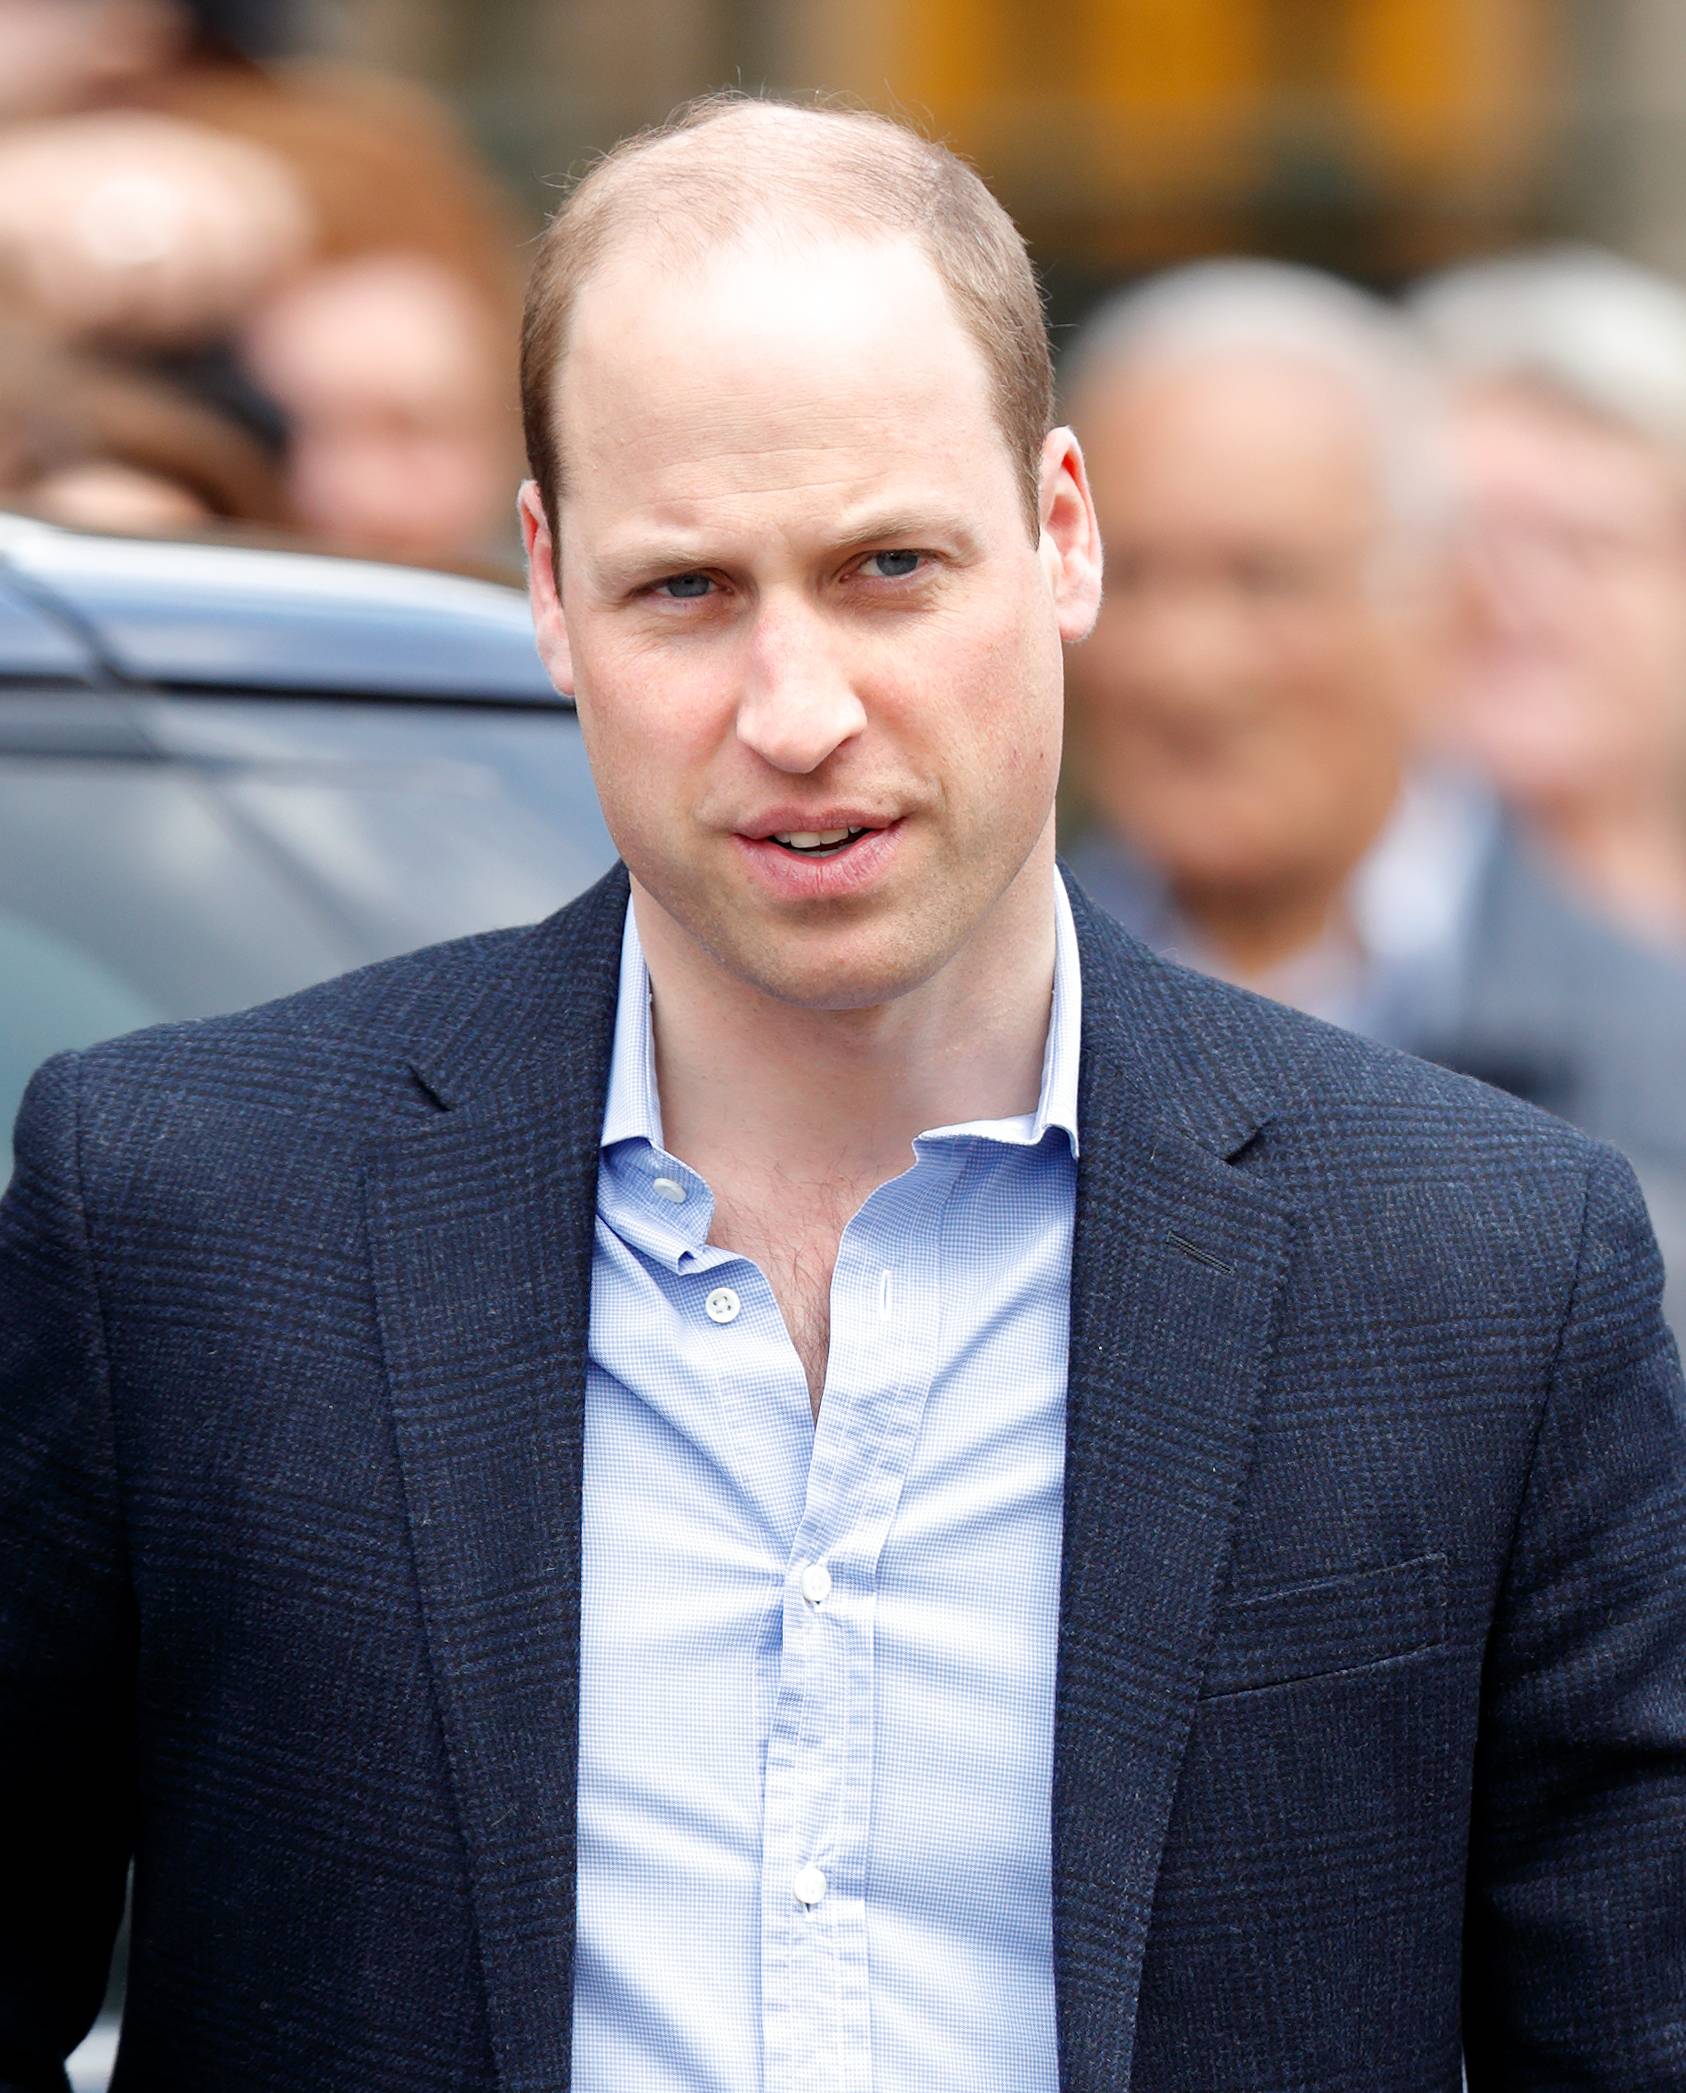 LONDON, UNITED KINGDOM - MAY 07: (EMBARGOED FOR PUBLICATION IN UK NEWSPAPERS UNTIL 24 HOURS AFTER CREATE DATE AND TIME) Prince William, Duke of Cambridge attends the launch the King's Cup Regatta at the Cutty Sark, Greenwich on May 7, 2019 in London, England. The Regatta will take place in August on the Isle of Wight and see eight sailing boats, two of which skippered by the Duke & Duchess, race for The King's Cup. (Photo by Max Mumby/Indigo/Getty Images)